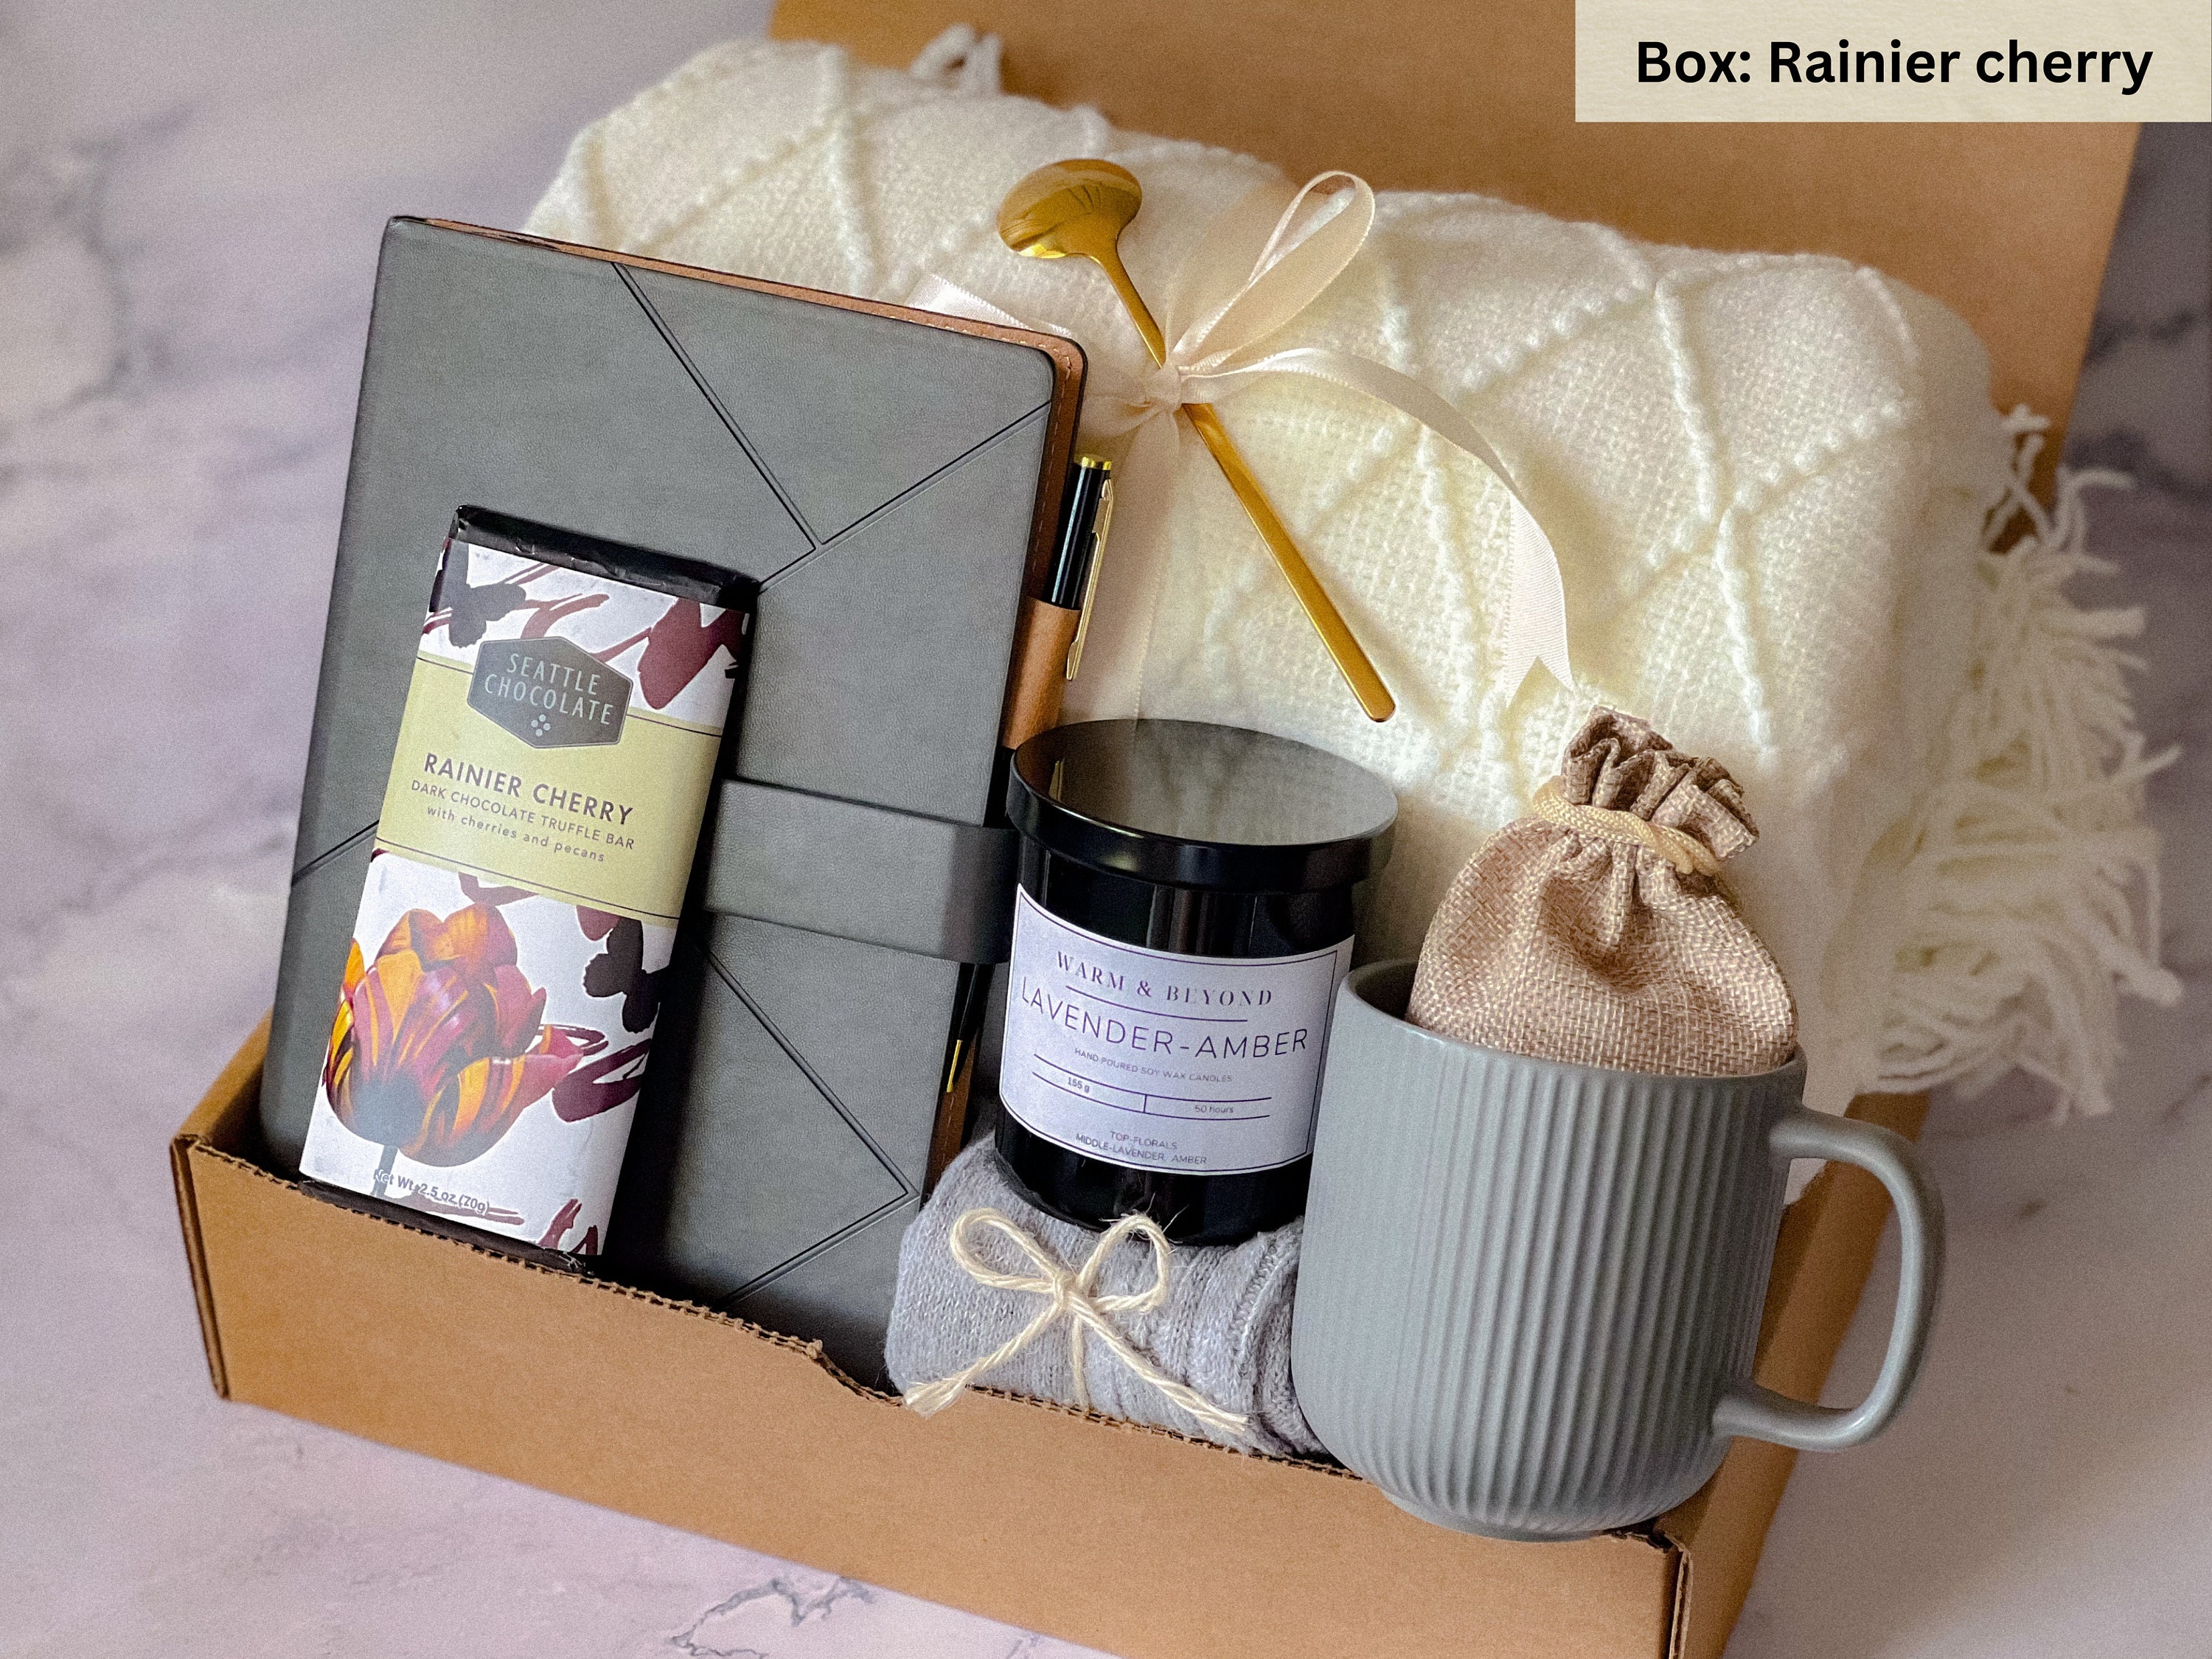 Personalized Hygge Gift Box, Self Care Gift Box For Her, Self Care Kit –  Plant Box Co